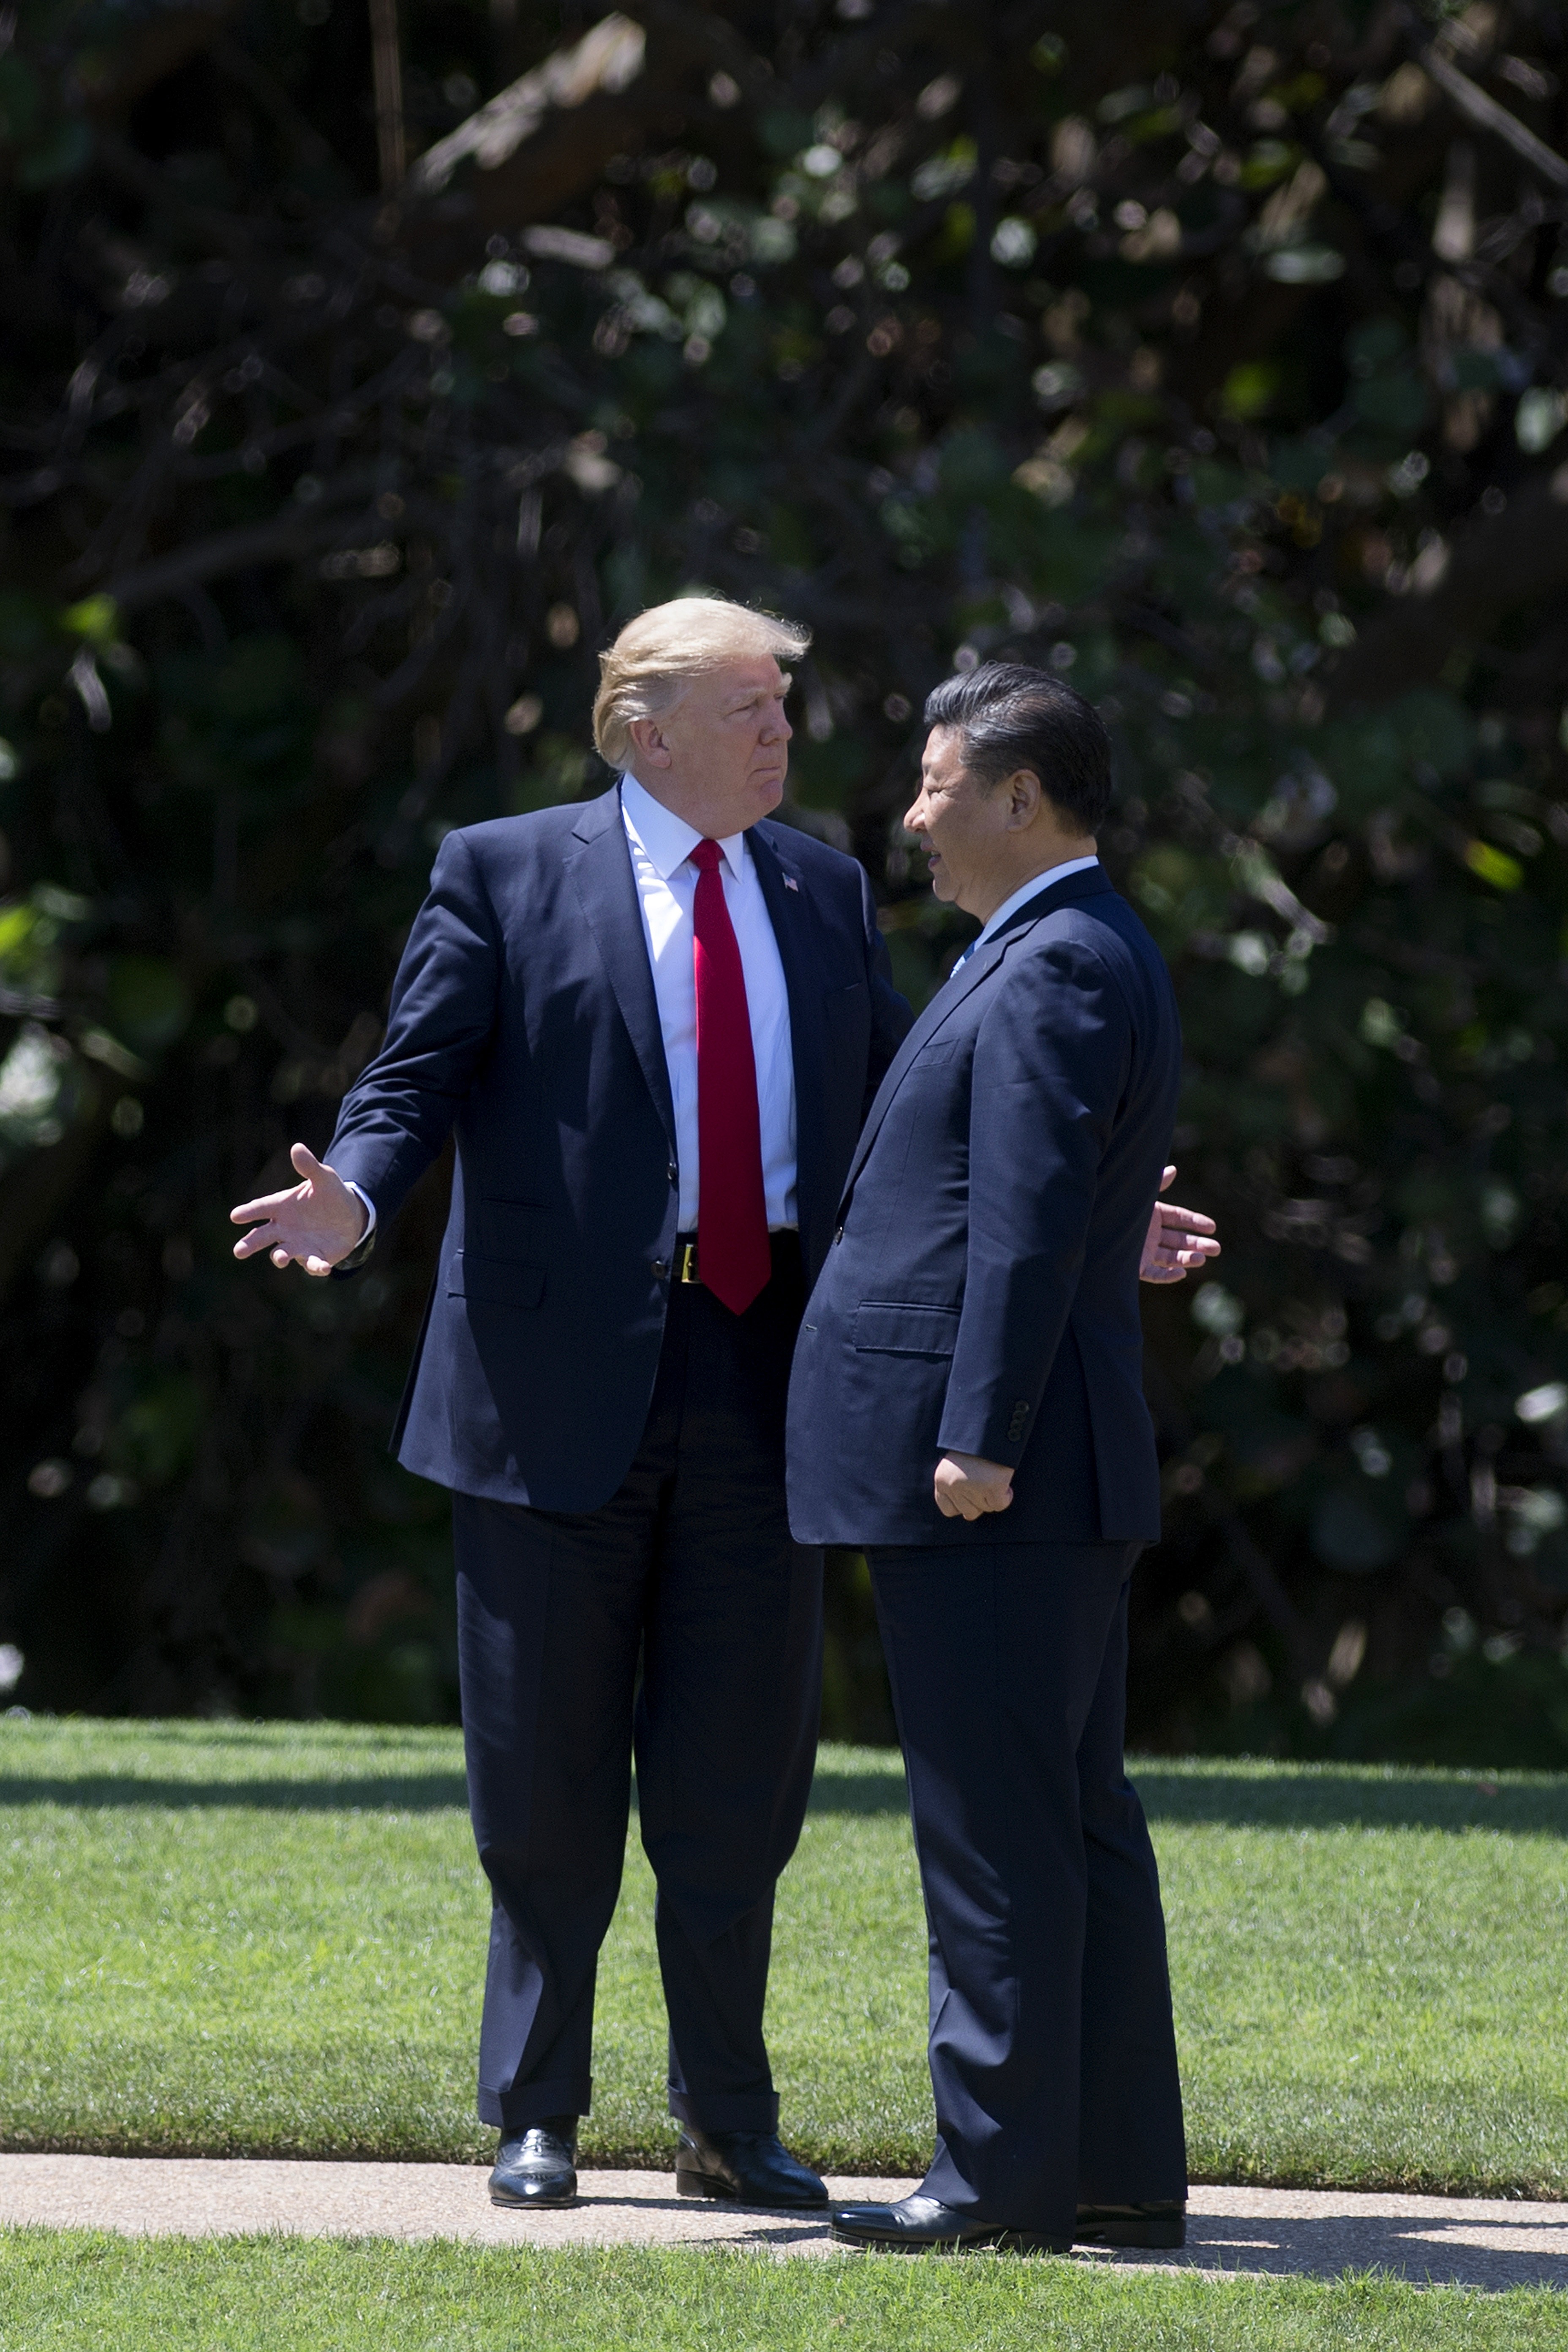 US President Donald Trump and Chinese President Xi Jinping: Is the bromance over? Photo: AFP